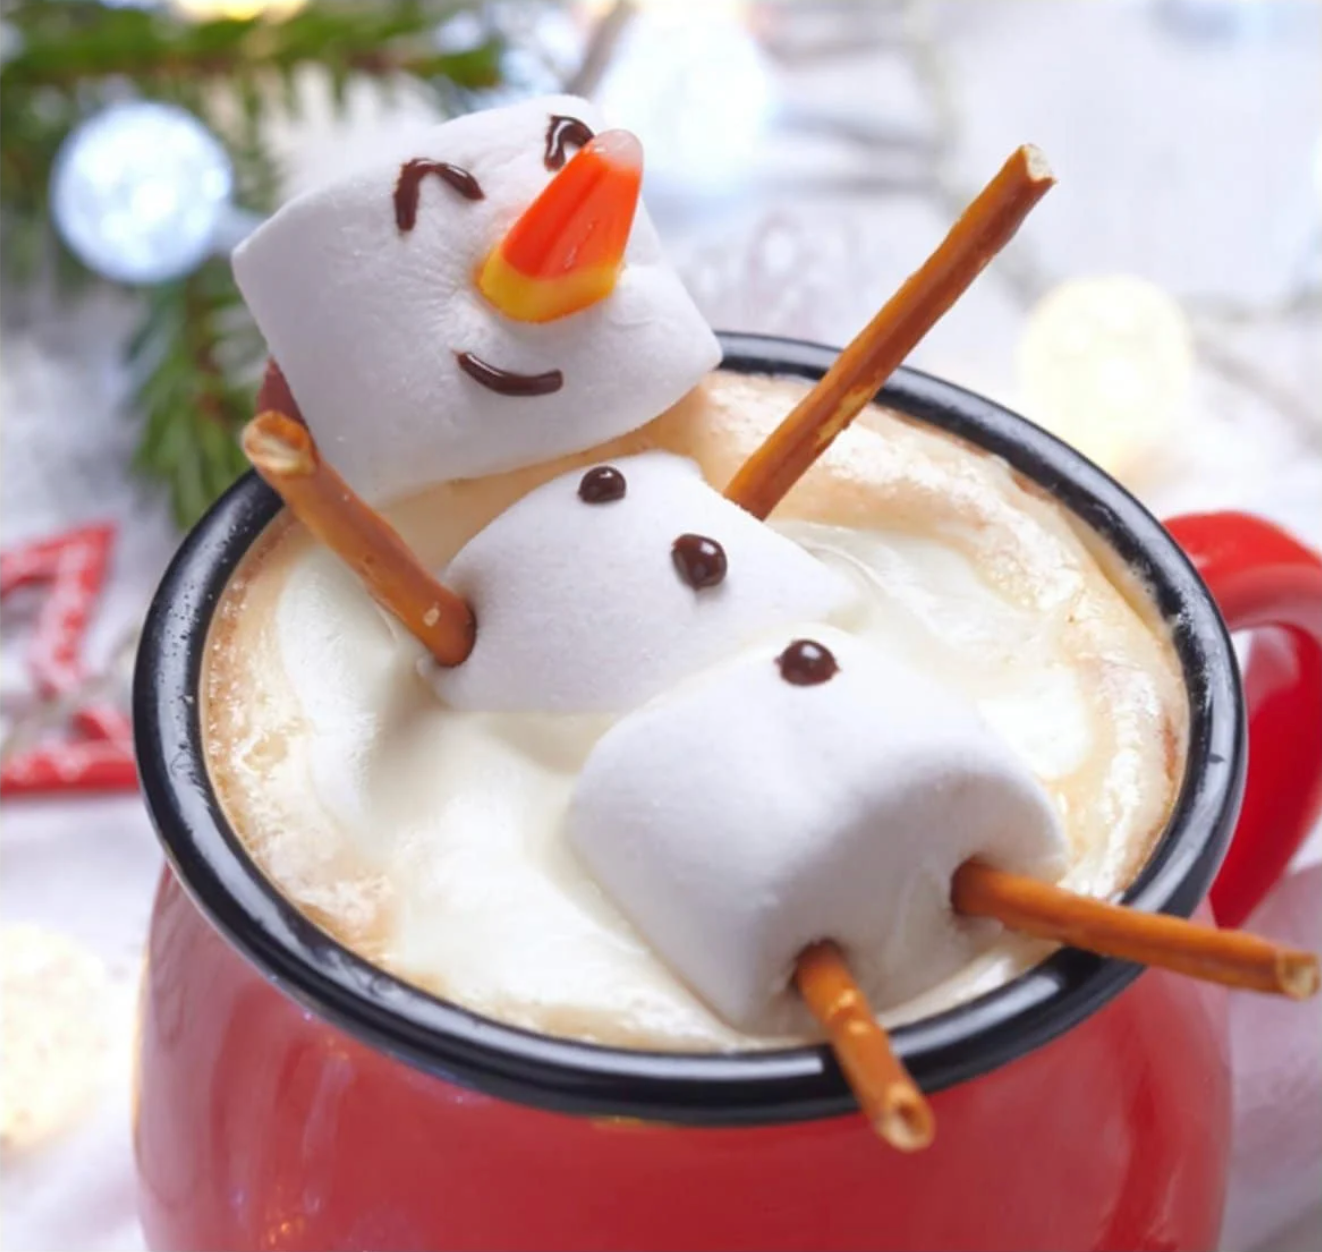 A snowman made out of marshmallows, sitting in a cup of hot chocolate.